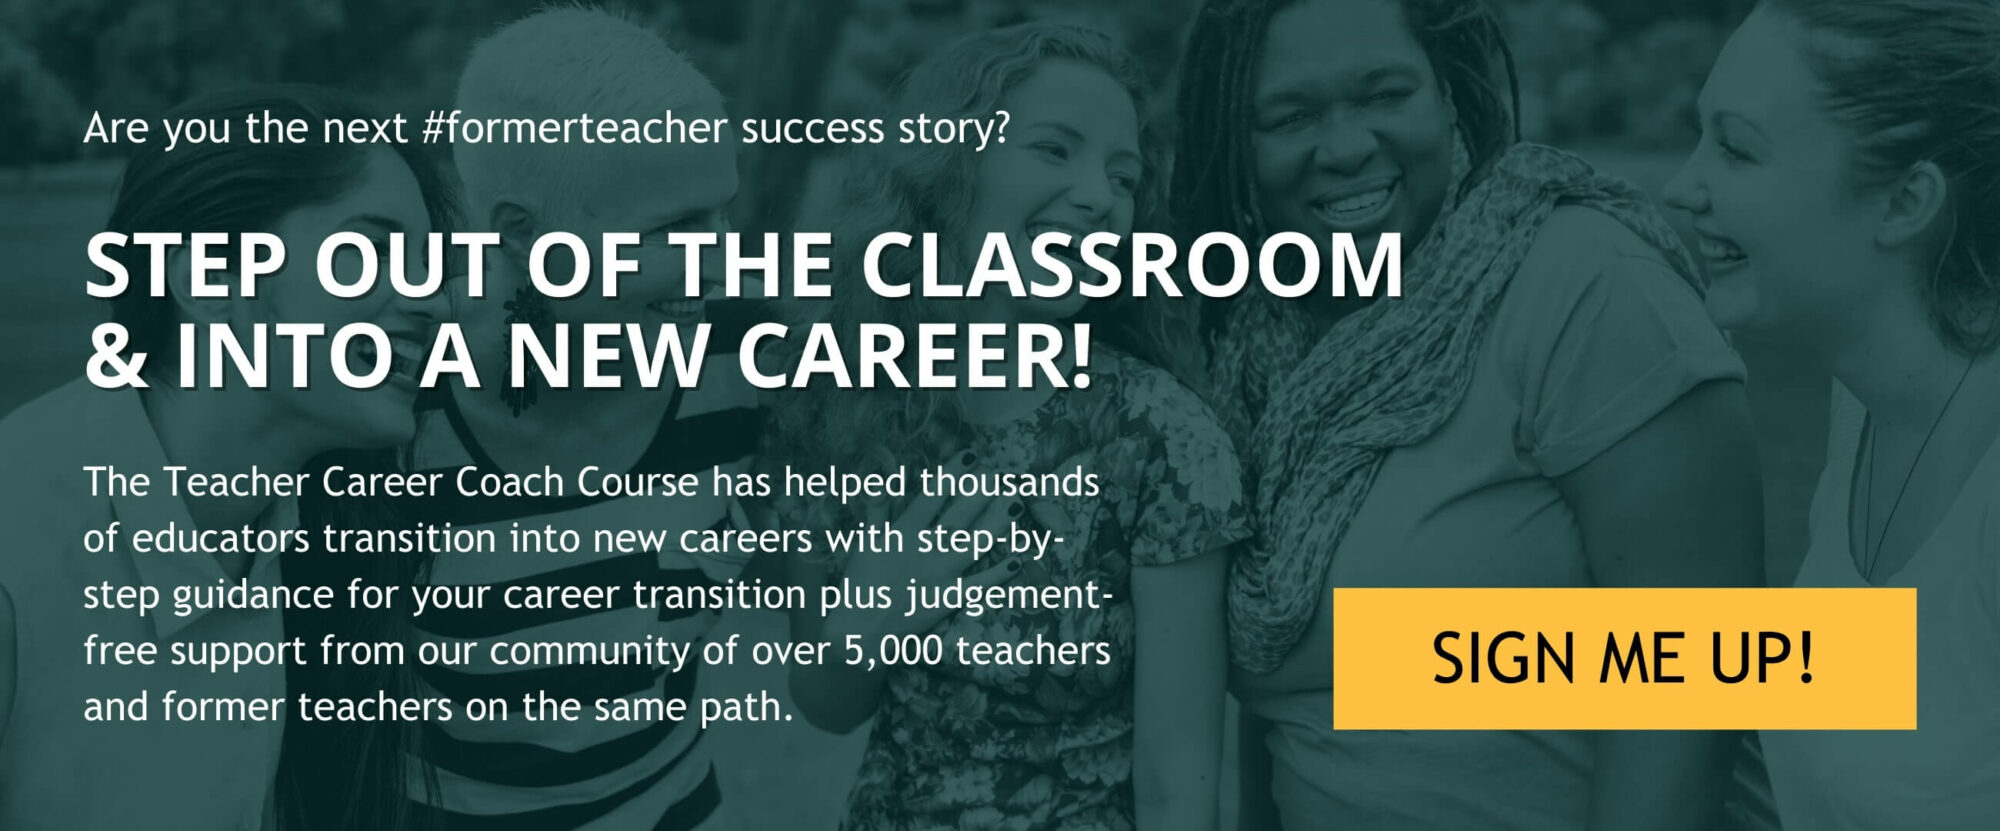 A CTA banner promoting the Teacher Career Coach Course for teachers who quit the profession.